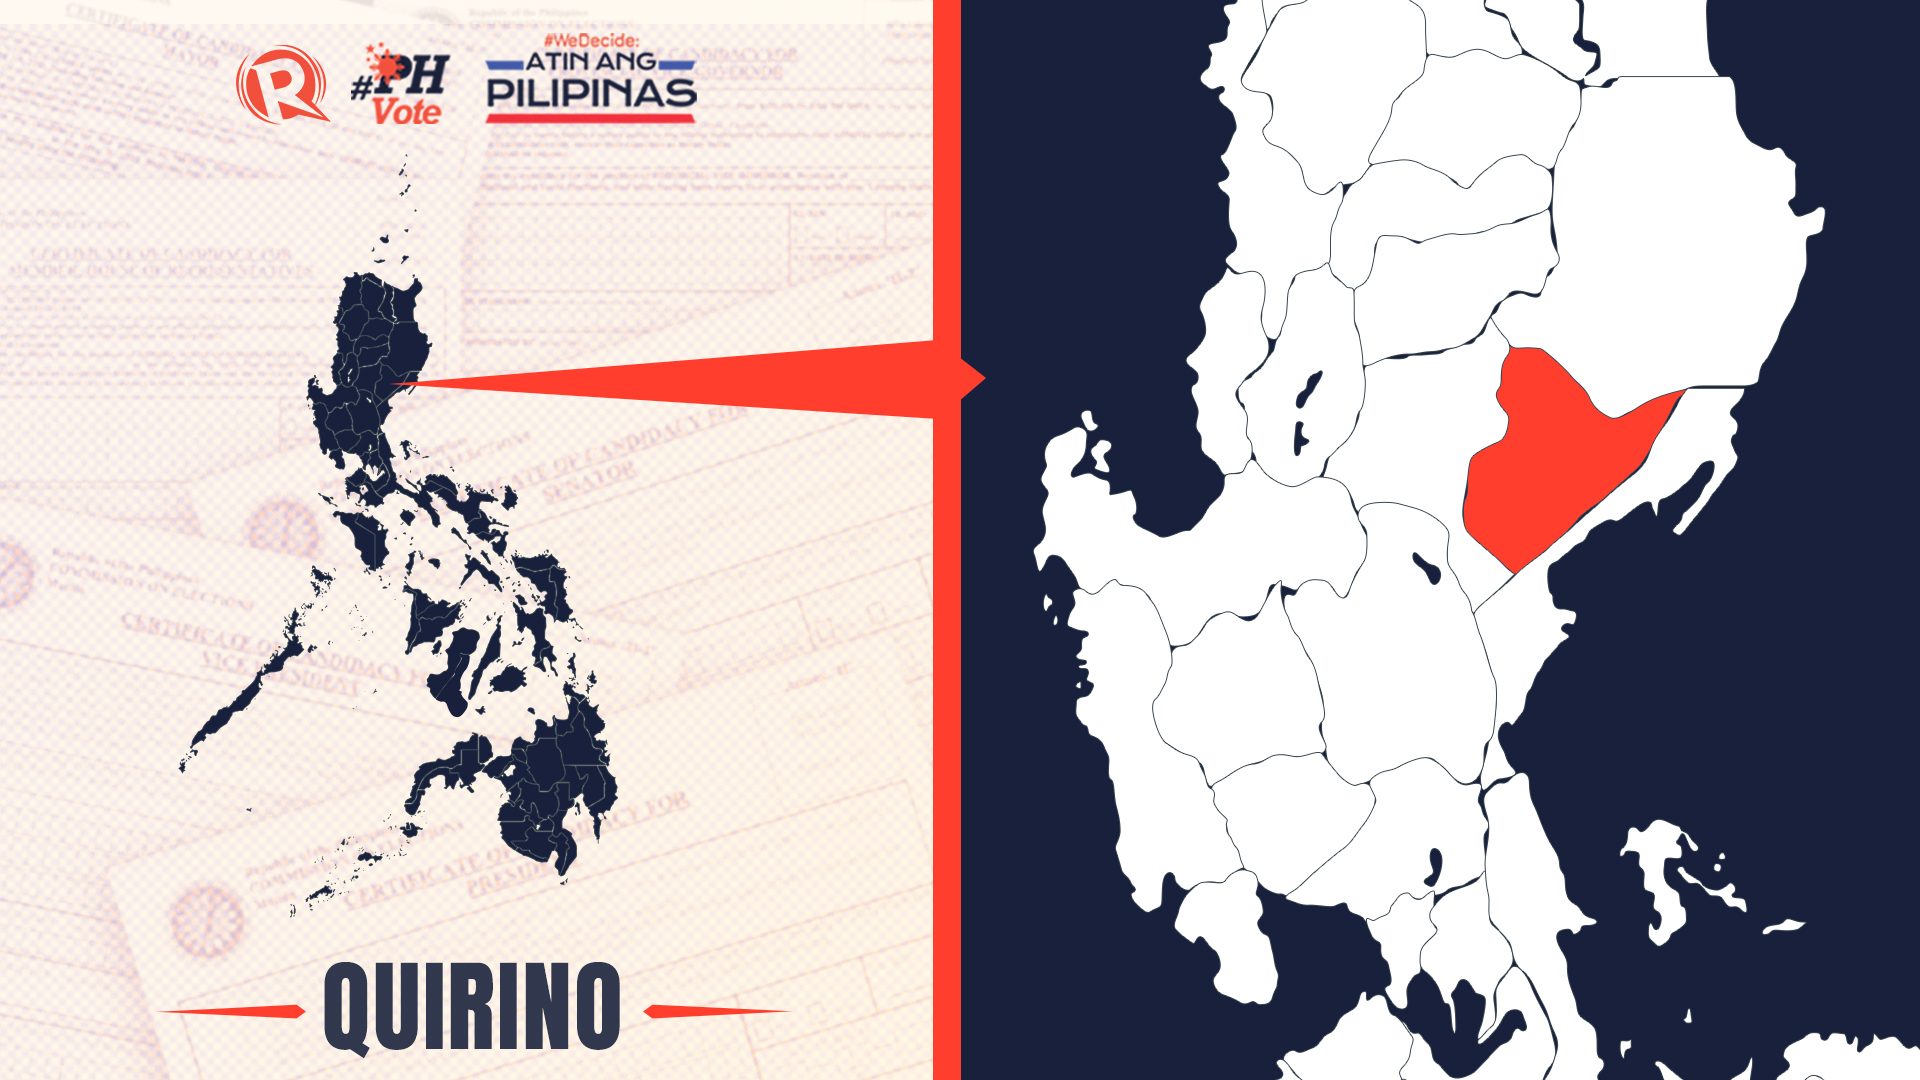 LIST: Who is running in Quirino in the 2022 Philippine elections?